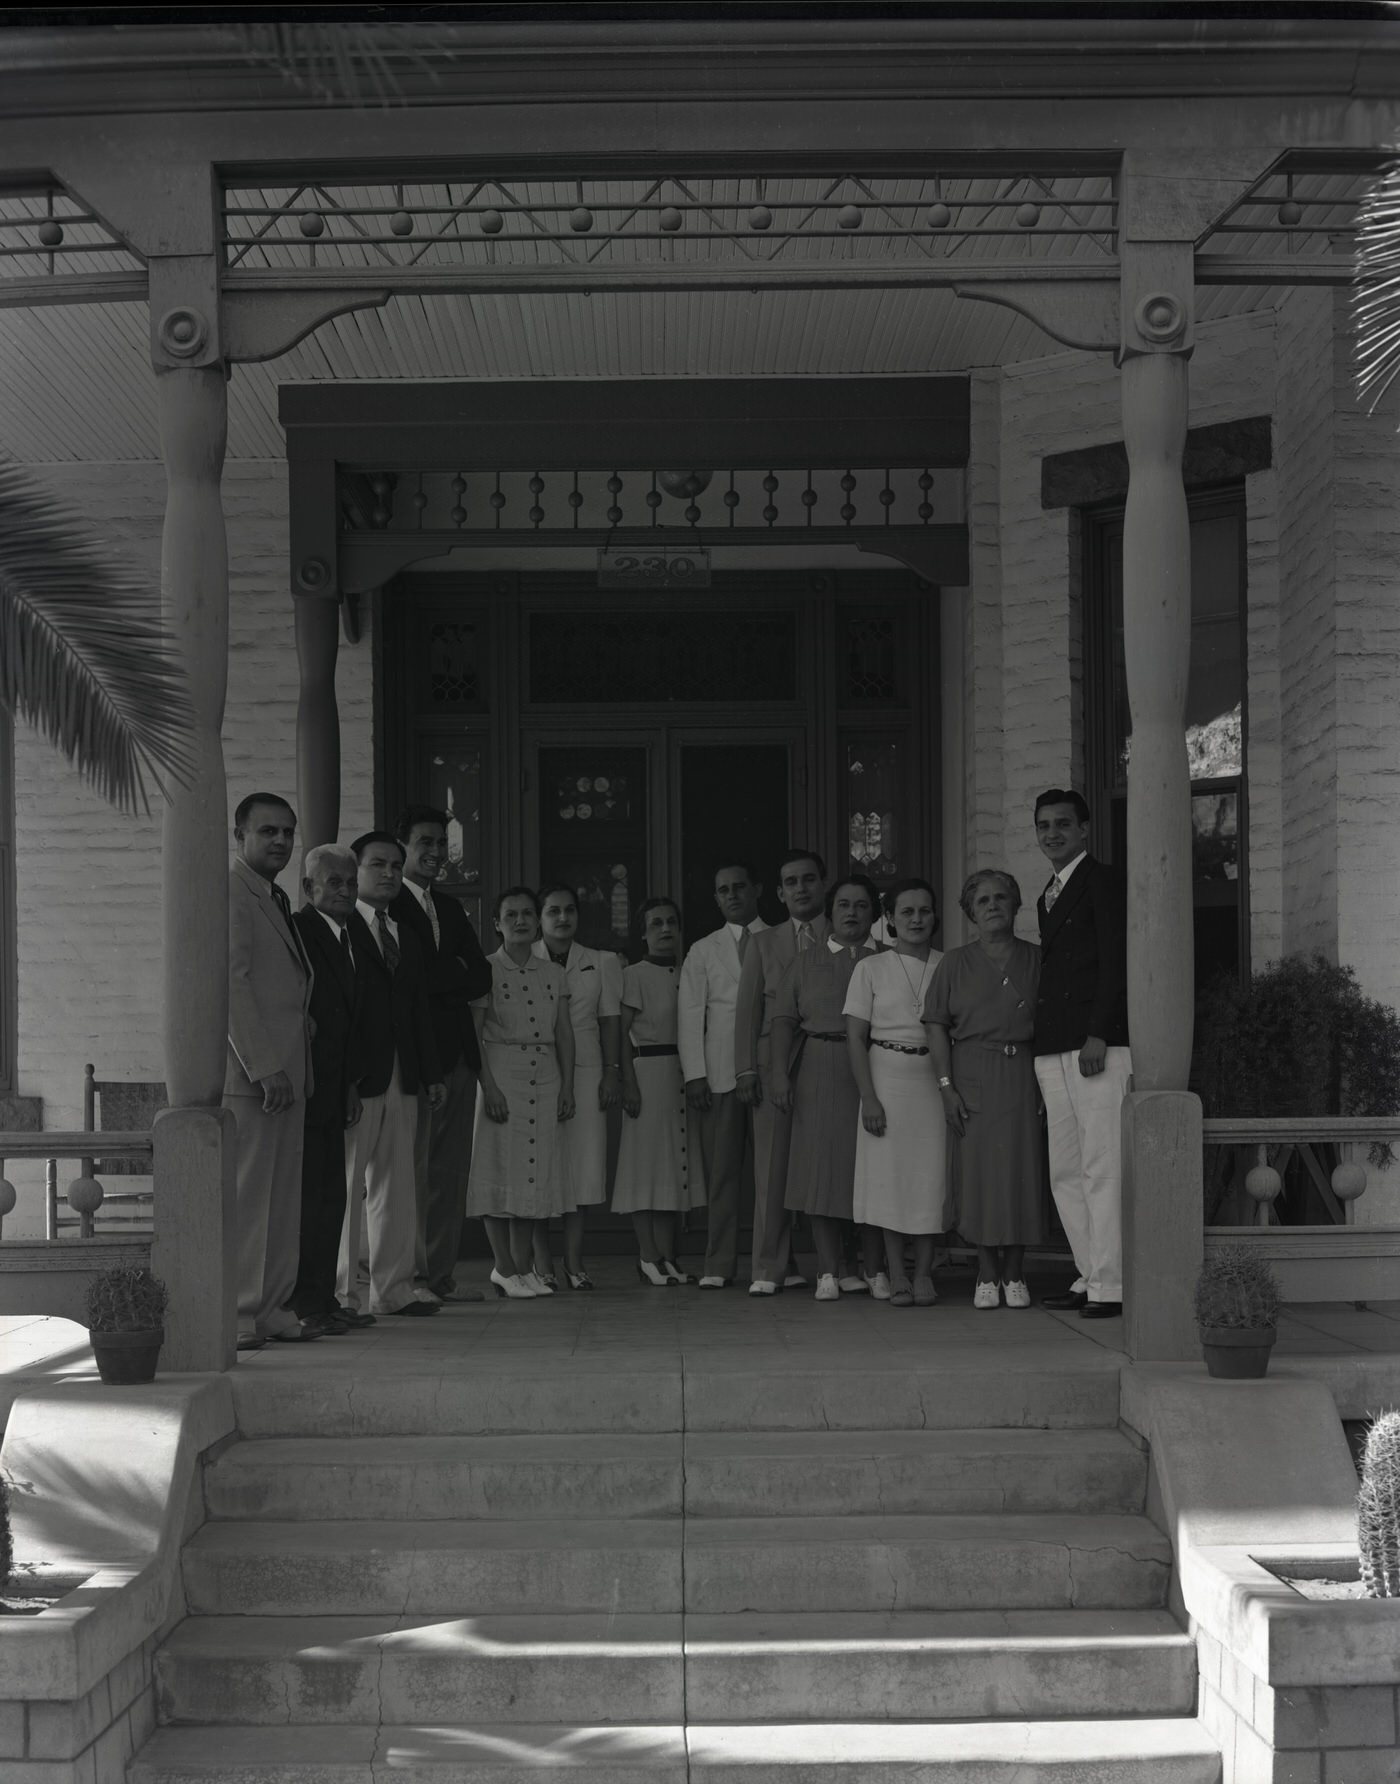 Grosso Family. In 1938, the Grosso family lived at 230 E. Monroe St. in Phoenix. This picture was taken approximately 3 months before Charles Grosso was killed in an airplane crash.